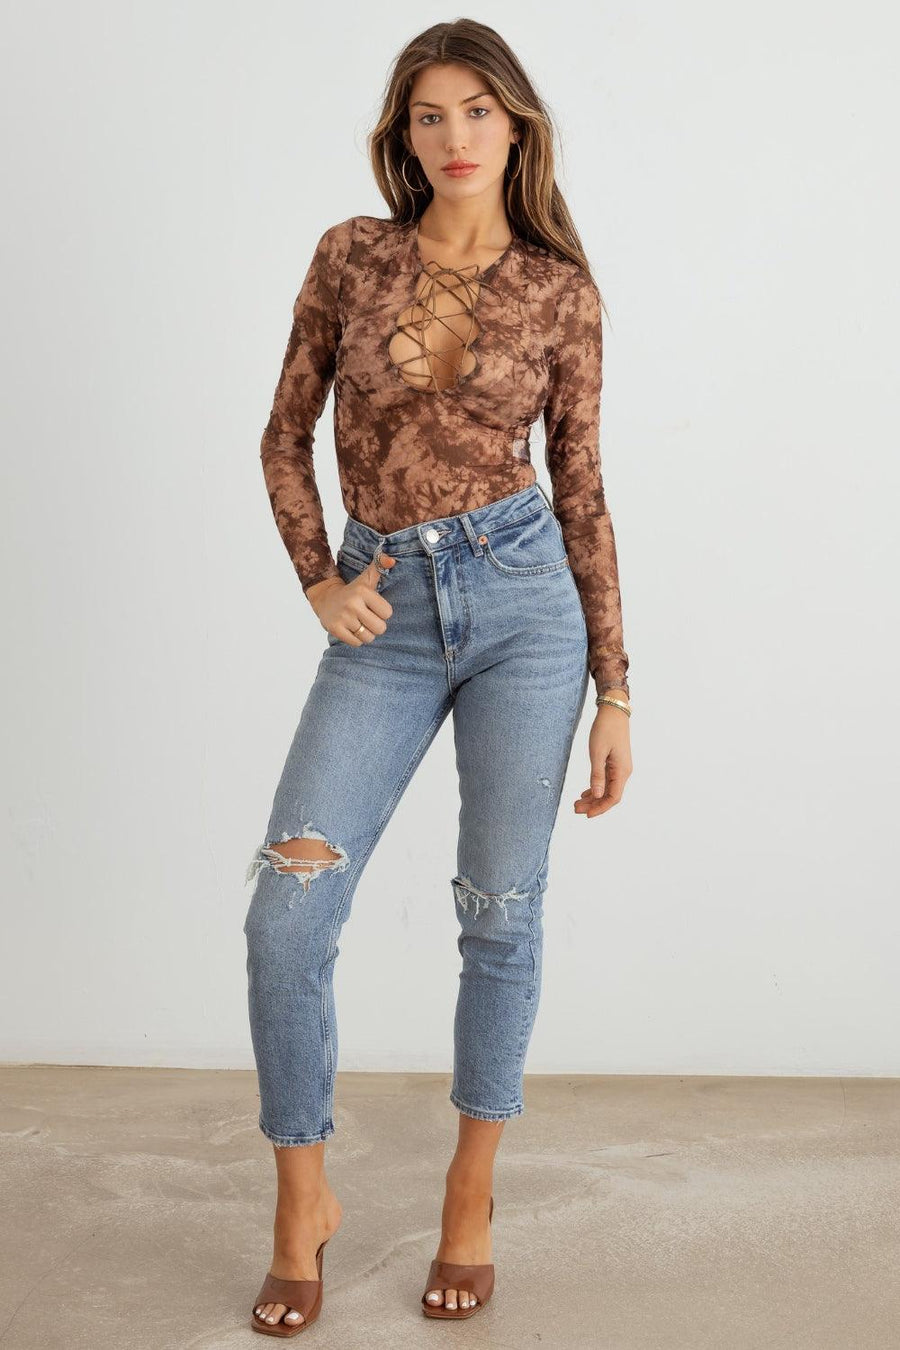 HERA COLLECTION Abstract Mesh Lace-Up Long Sleeve Bodysuit - Jessiz Boutique